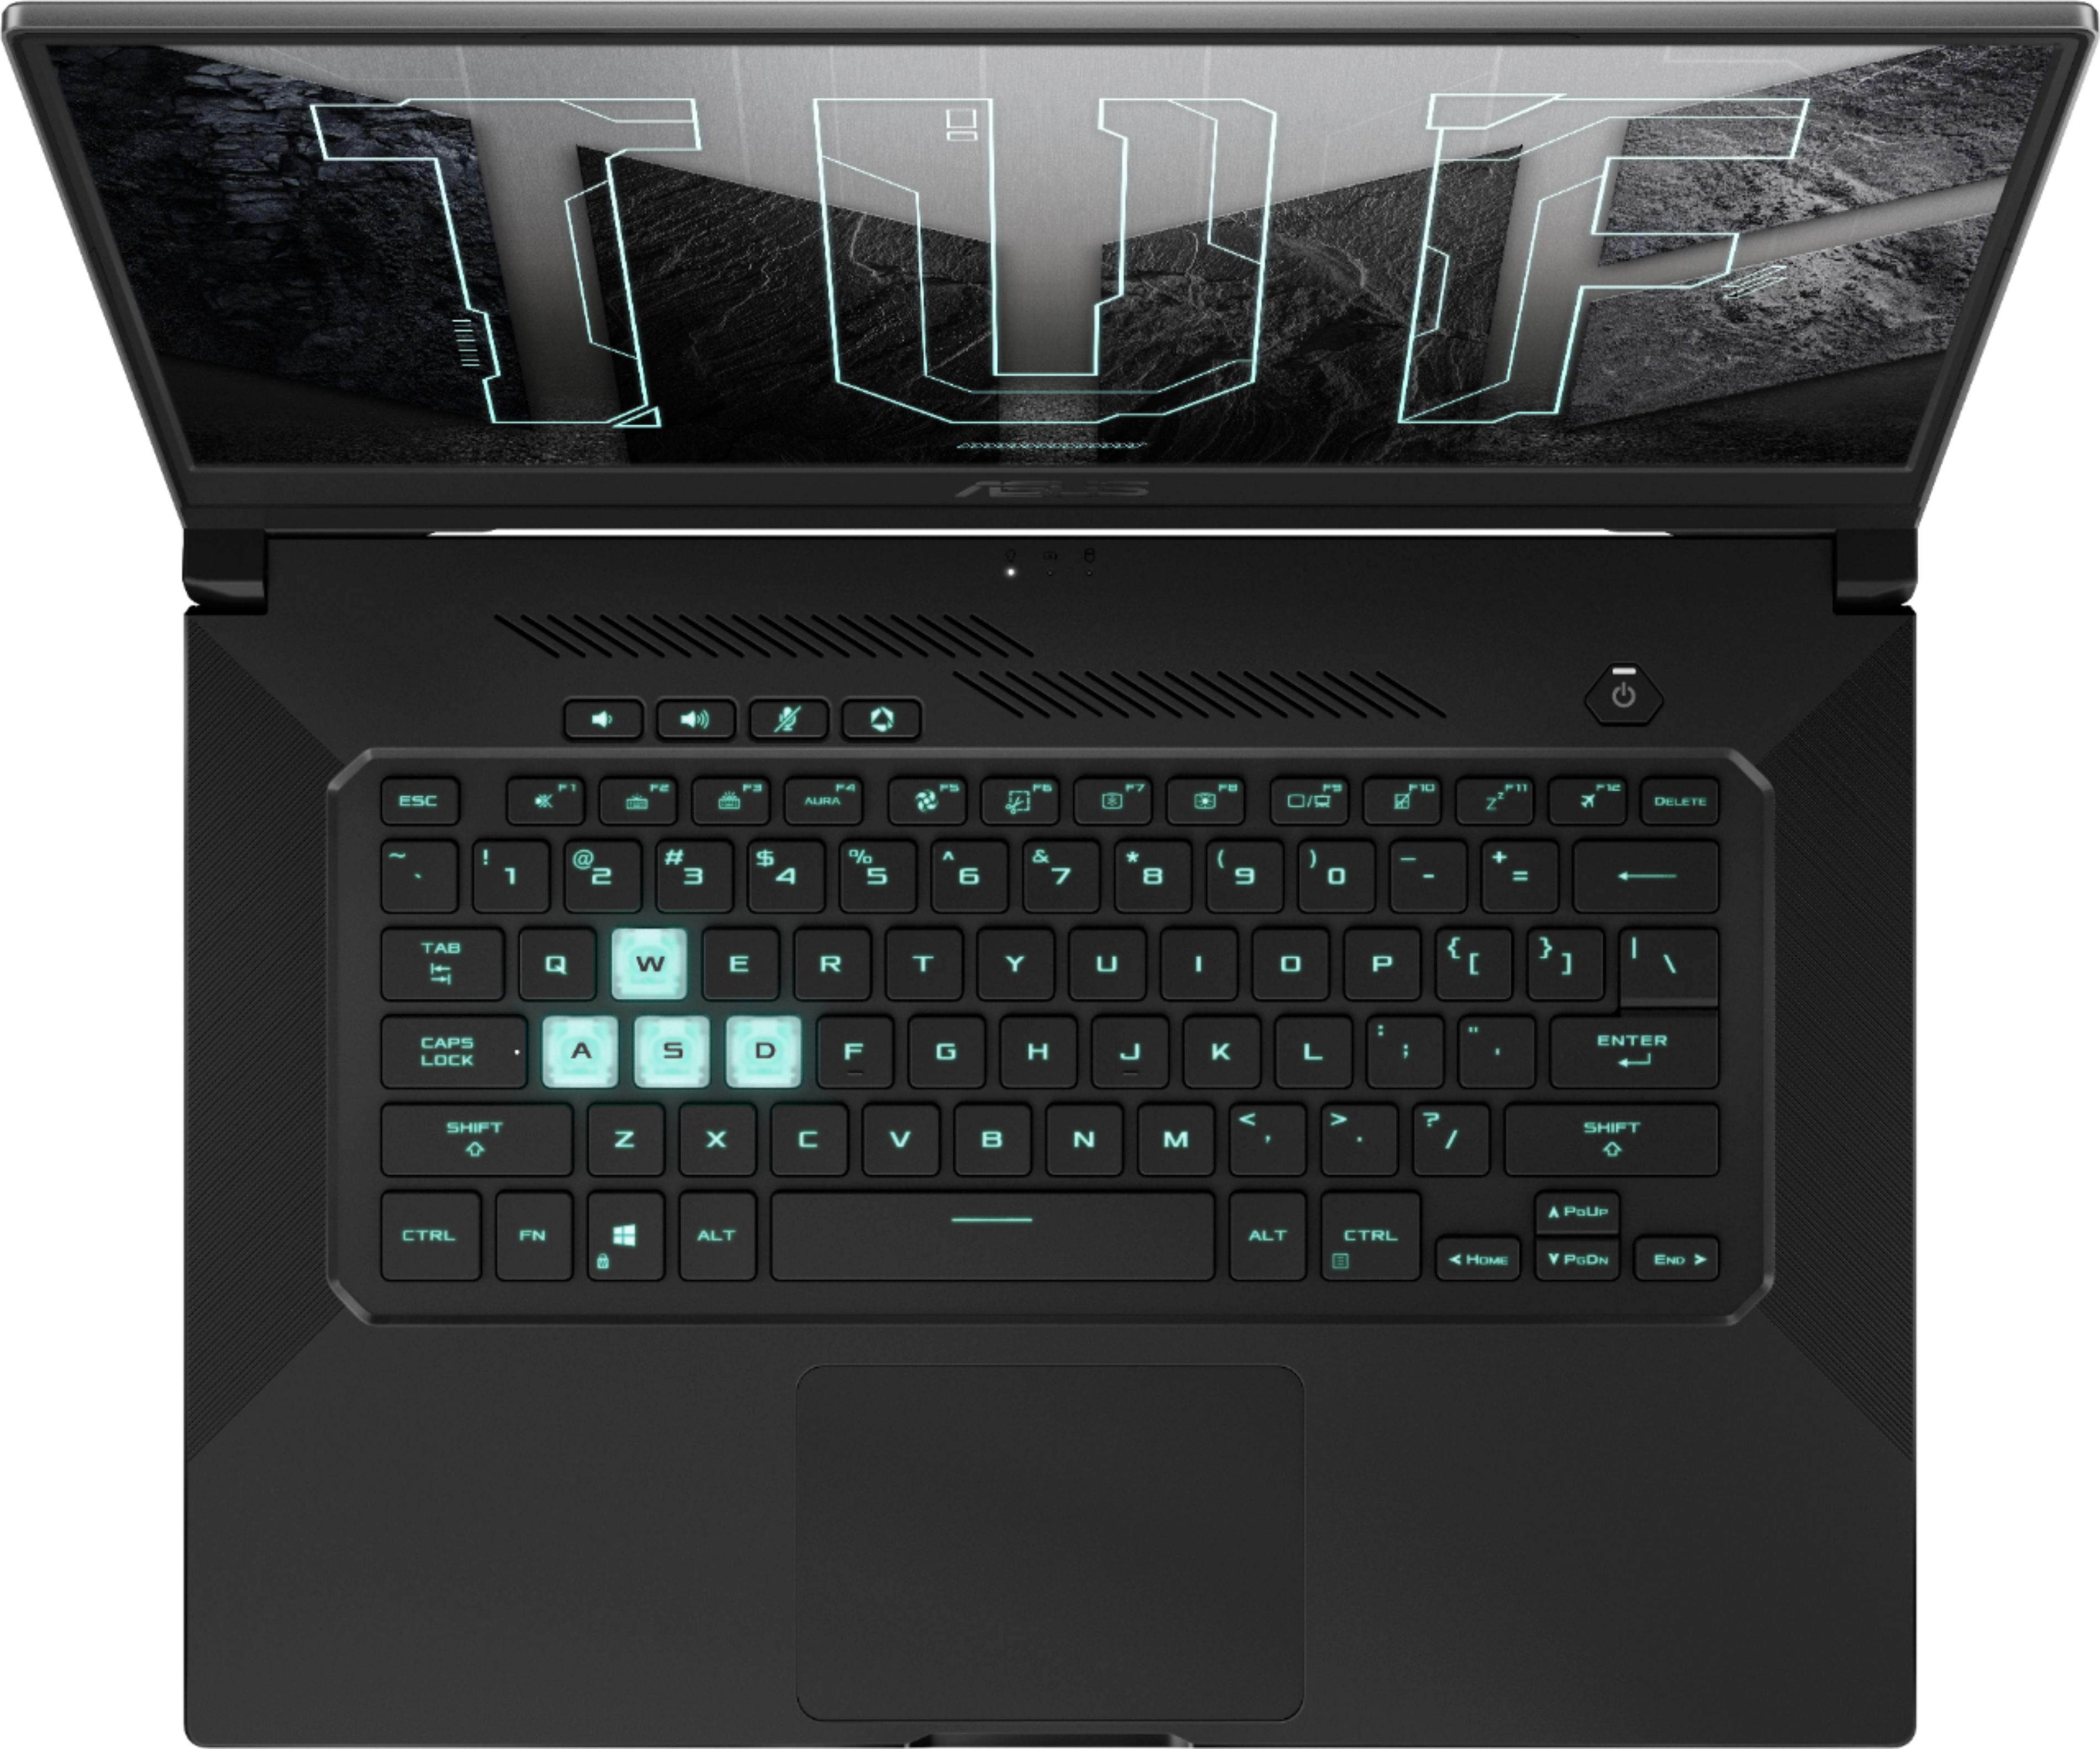 ASUS TUF Dash 15 Gaming and Entertainment Laptop (Intel i7-11370H 4-Core, 40GB RAM, 4TB PCIe SSD, 15.6" Full HD (1920x1080), NVIDIA RTX 3070, Wifi, Bluetooth, 1xHDMI, Backlit Keyboard, Win 10 Home) - image 4 of 5